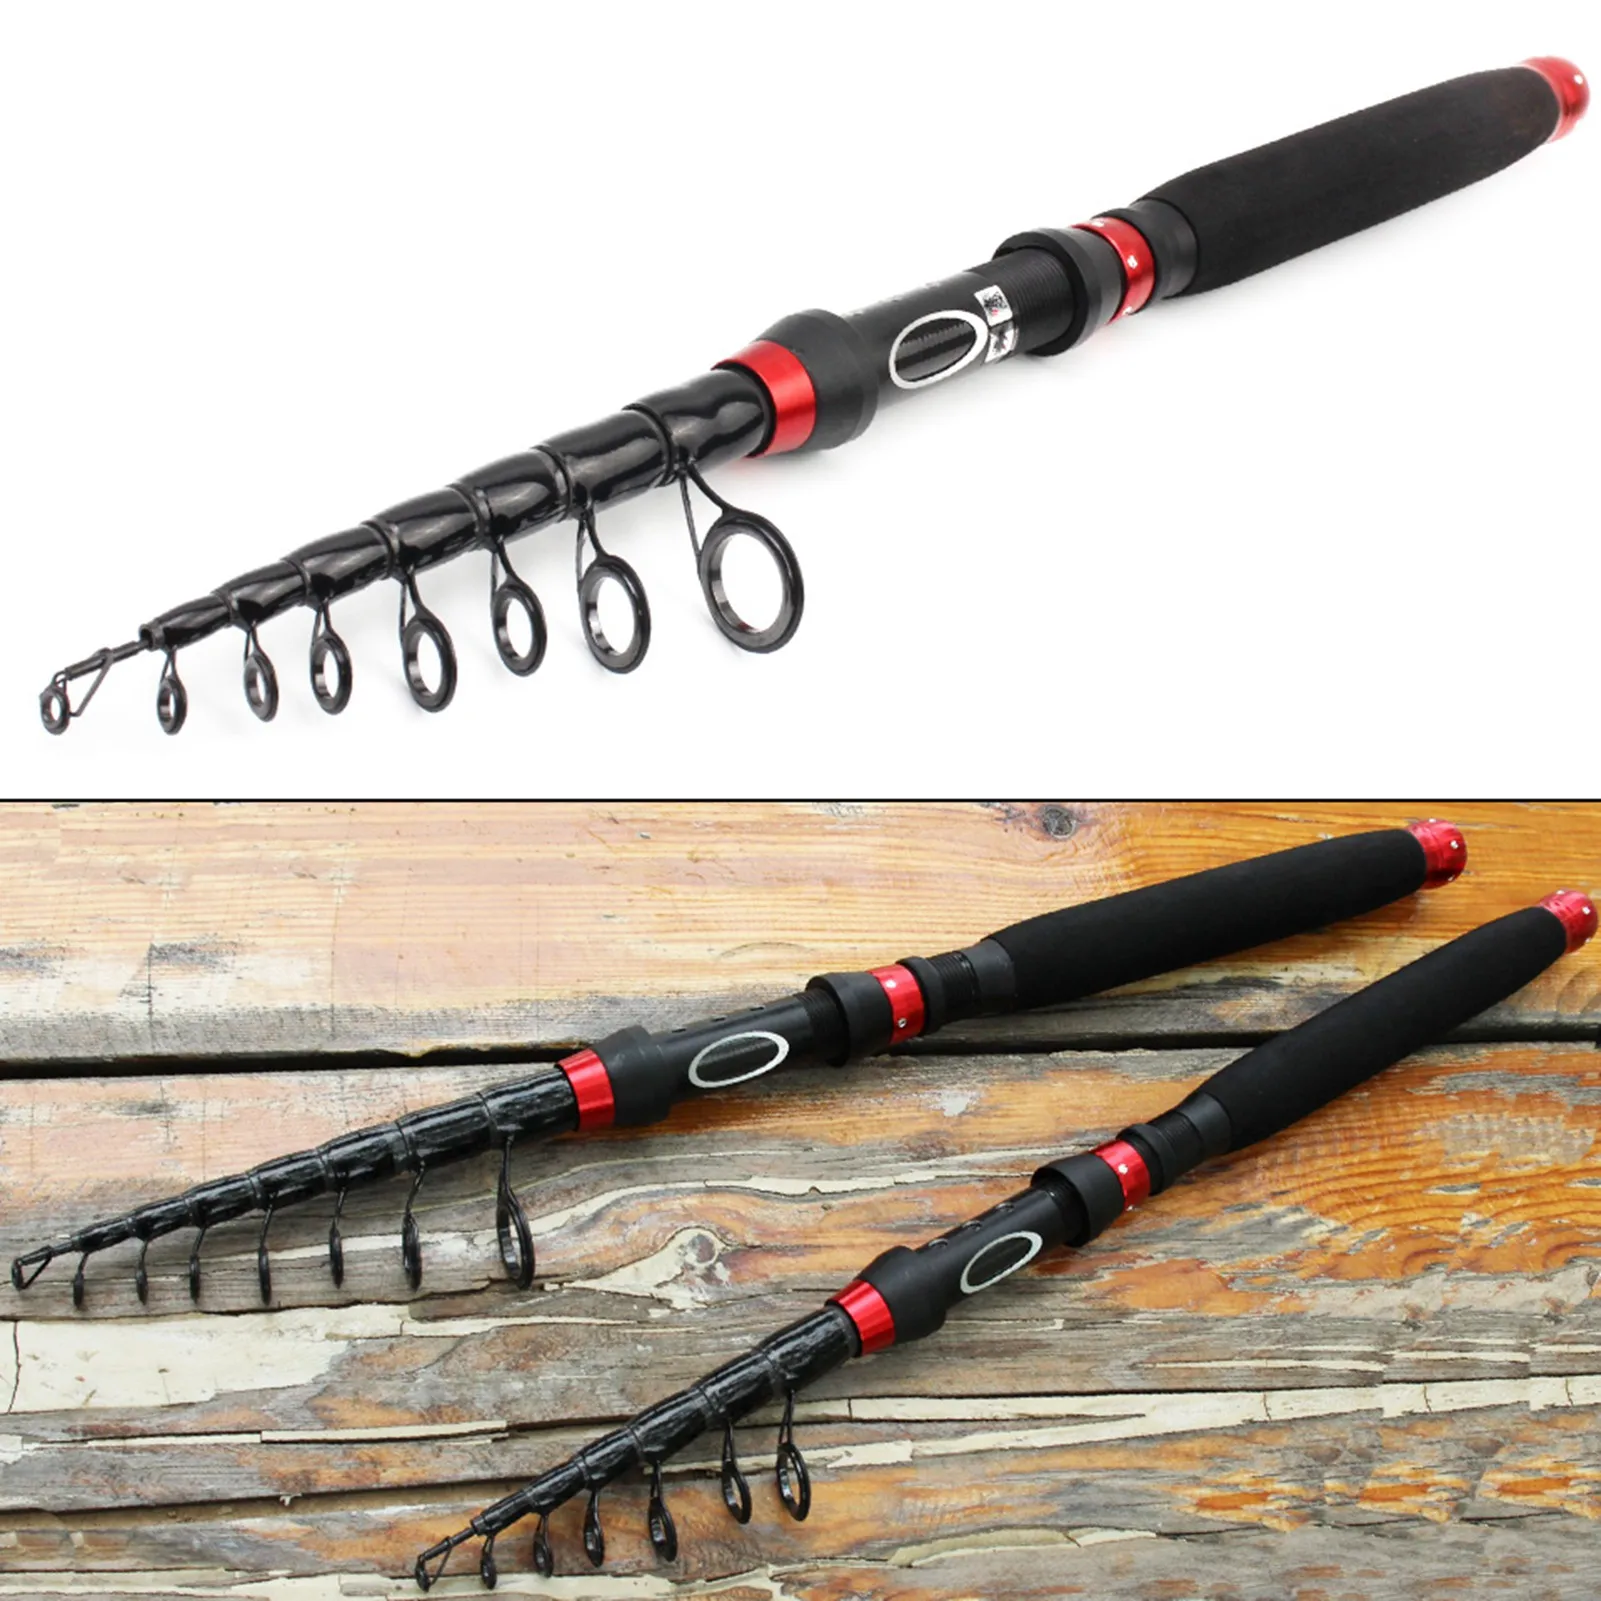 https://ae01.alicdn.com/kf/Hd5e966d85da842dface49a4ca97162f2S/1-8m2-1m2-4m2-7m3-0m-lure-Spinning-Rod-Telescopic-carbon-Fishing-Rod-Portable-Trout-Rod.jpg